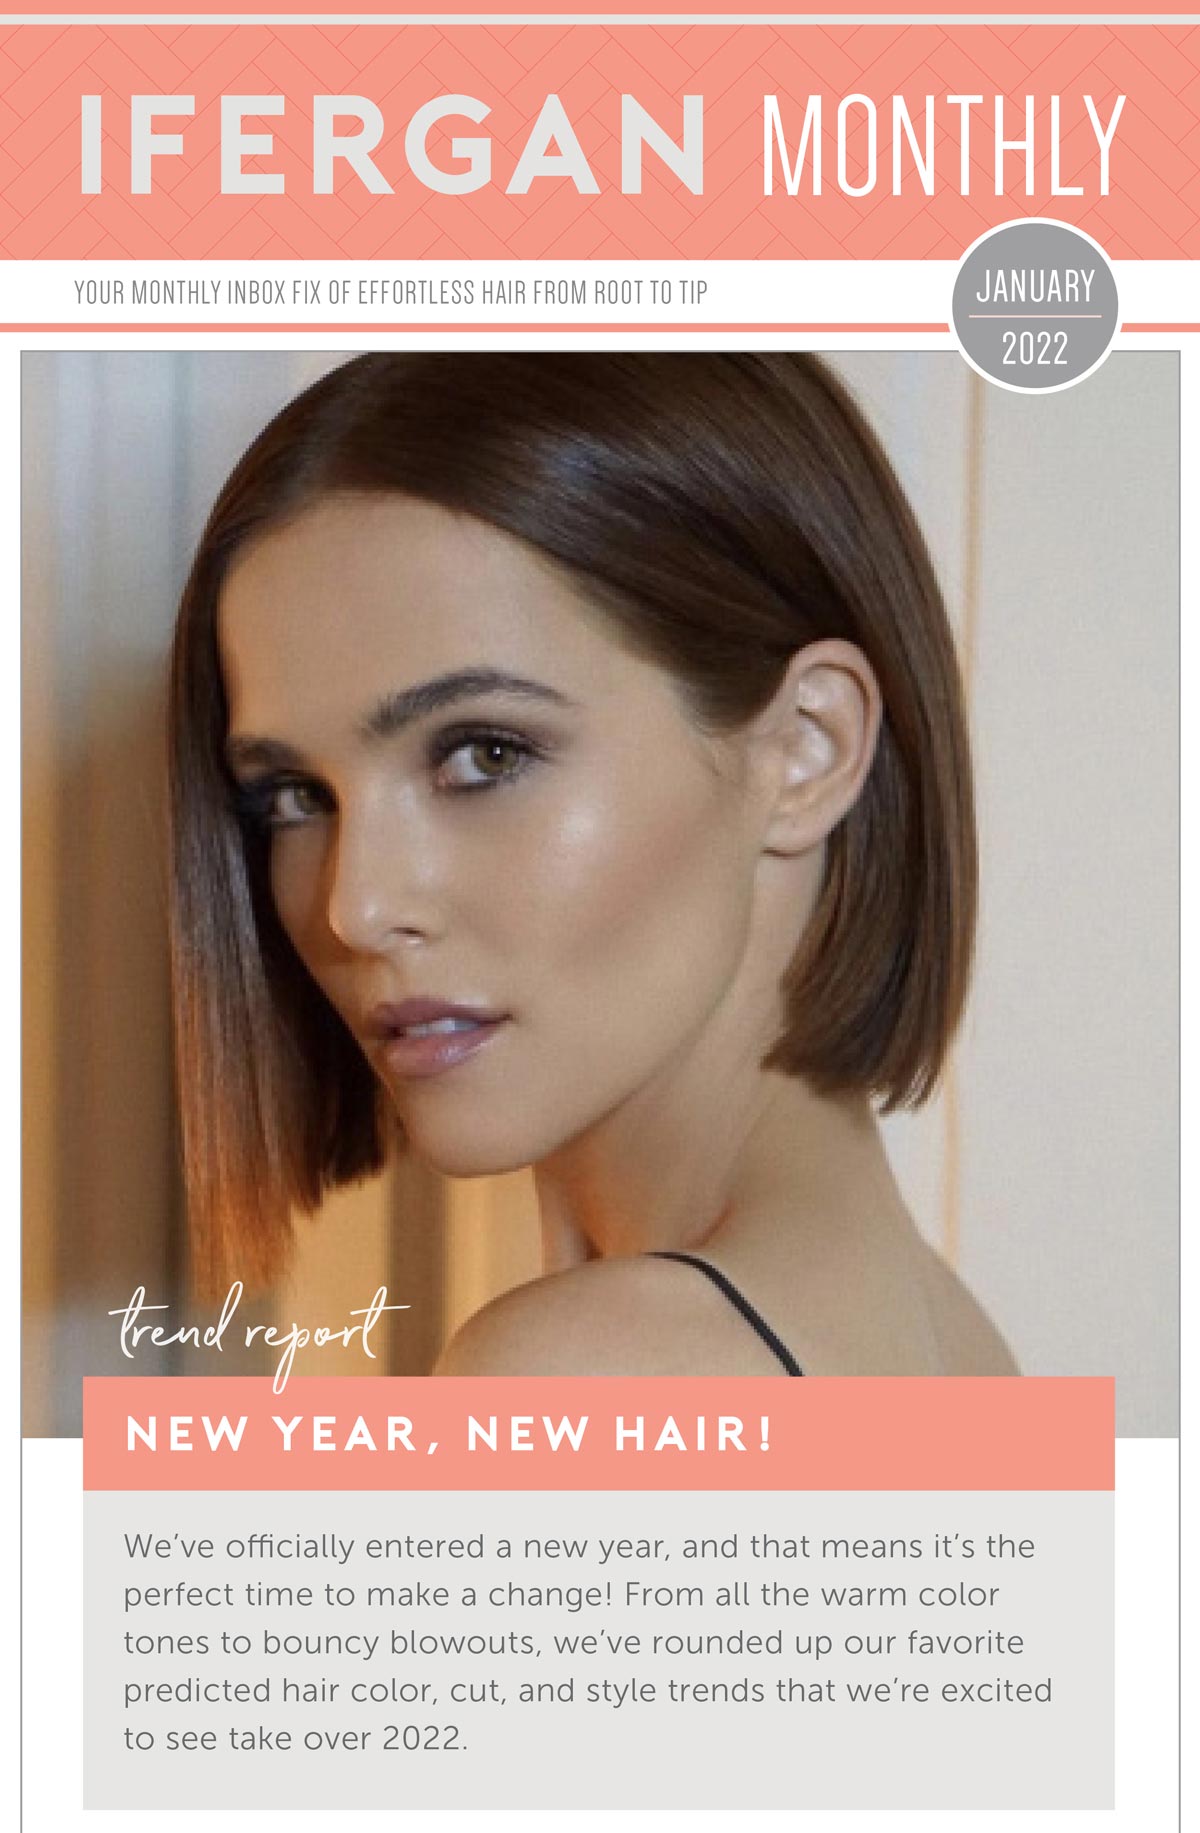 New Year, New Hair! We’ve officially entered a new year, and that means it’s the perfect time to make a change! From all the warm color tones to bouncy blowouts, we’ve rounded up our favorite predicted hair color, cut, and style trends that we’re excited to see take over 2022. 